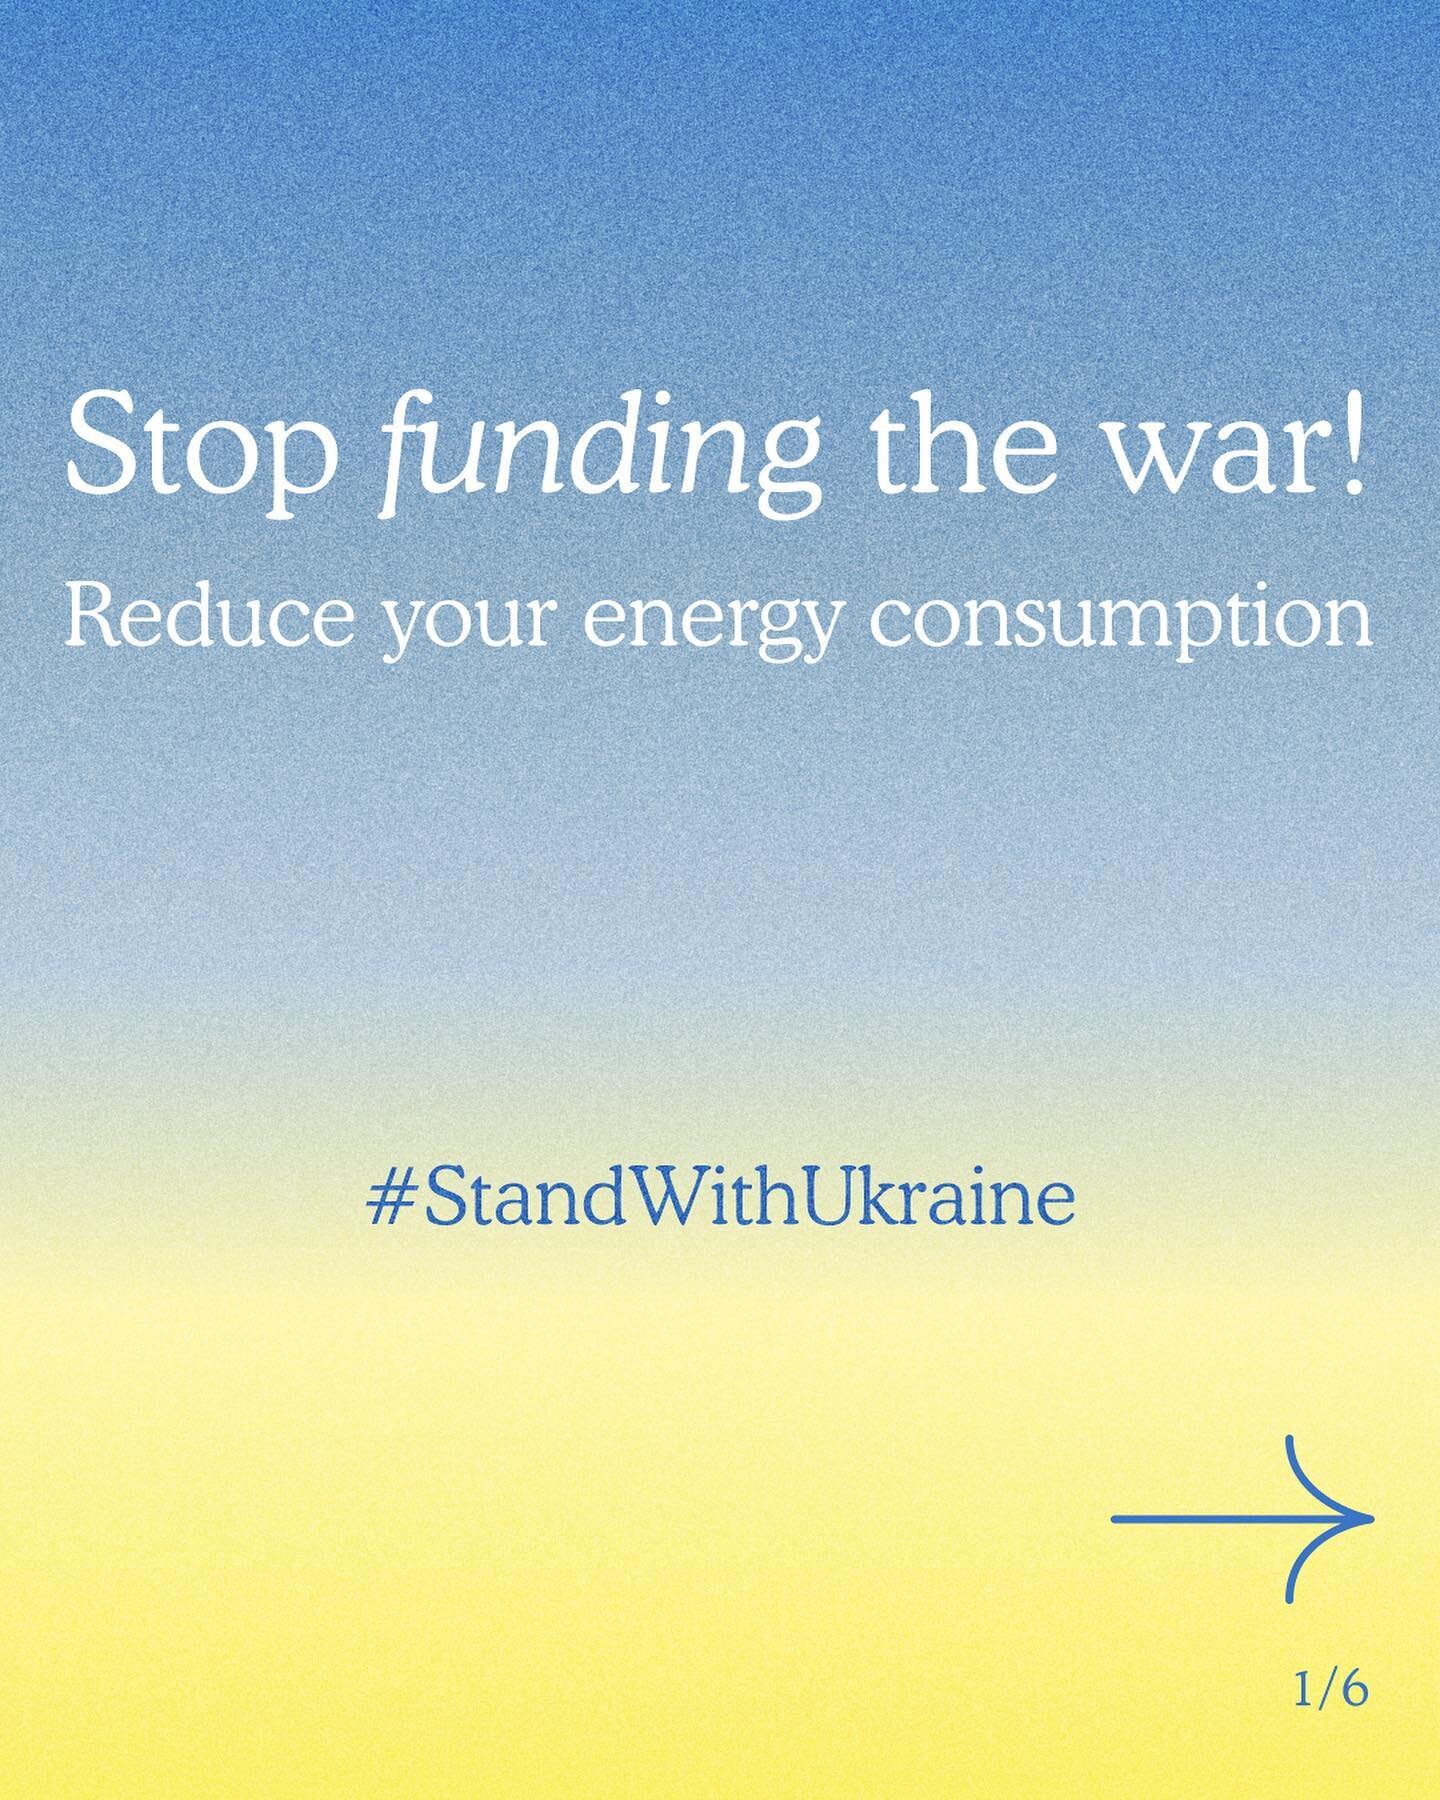 The collective @saveenergy4ukraine crunched some pretty impressive numbers about the impact our energy consumption can have on the current war. I was happy to help them put together these slides, please share to spread awareness about this super prac